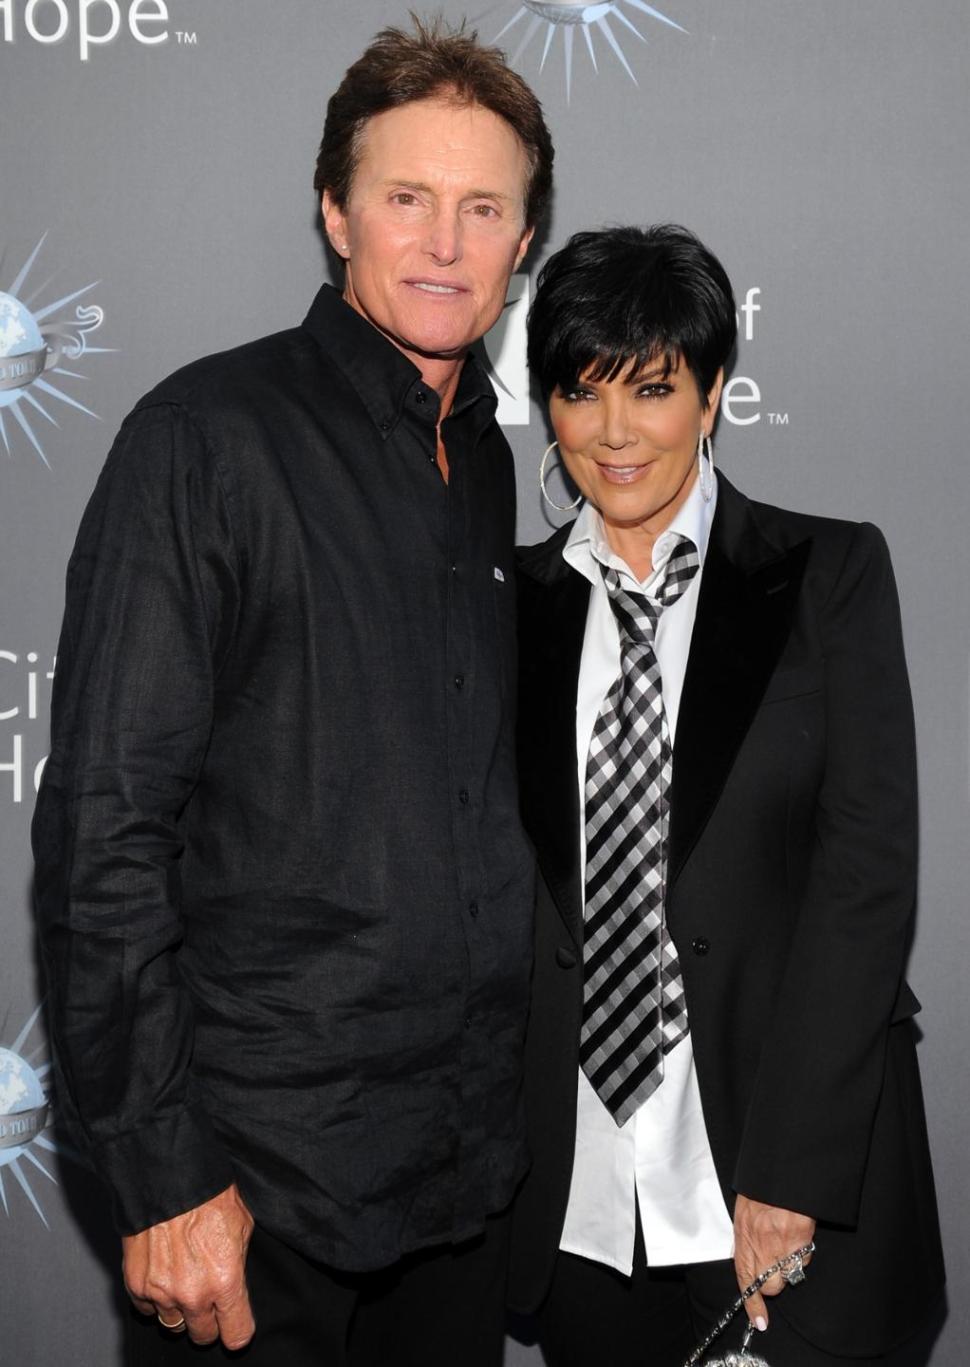 Bruce Jenner and Kris Kardashian are pictured together in 2011.